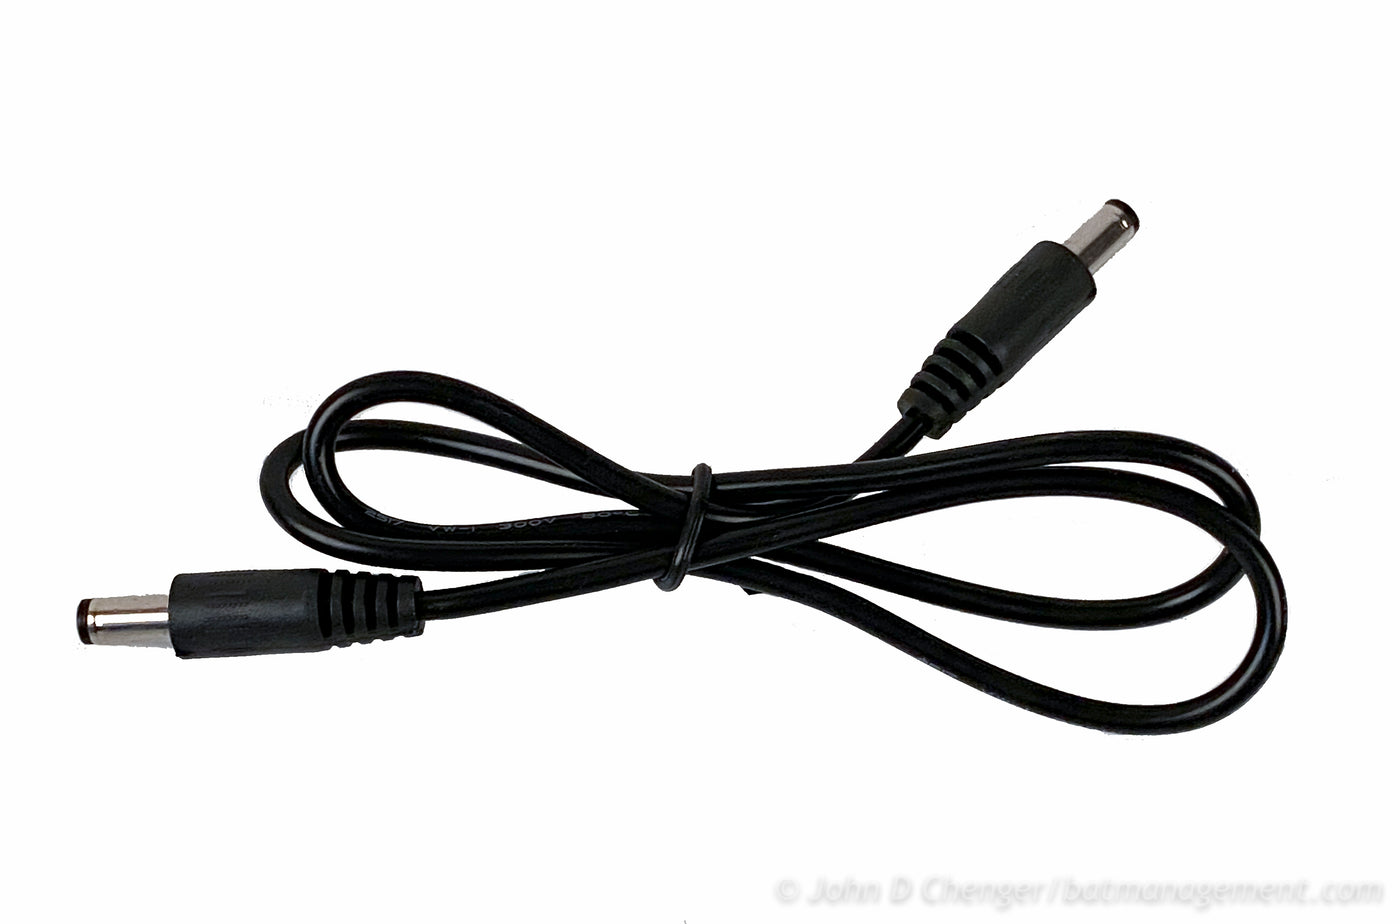 IRLamp6/IRLamp7 2.1mm male-to-male Power Cord, 24'' – Bat Conservation and  Management, Inc.